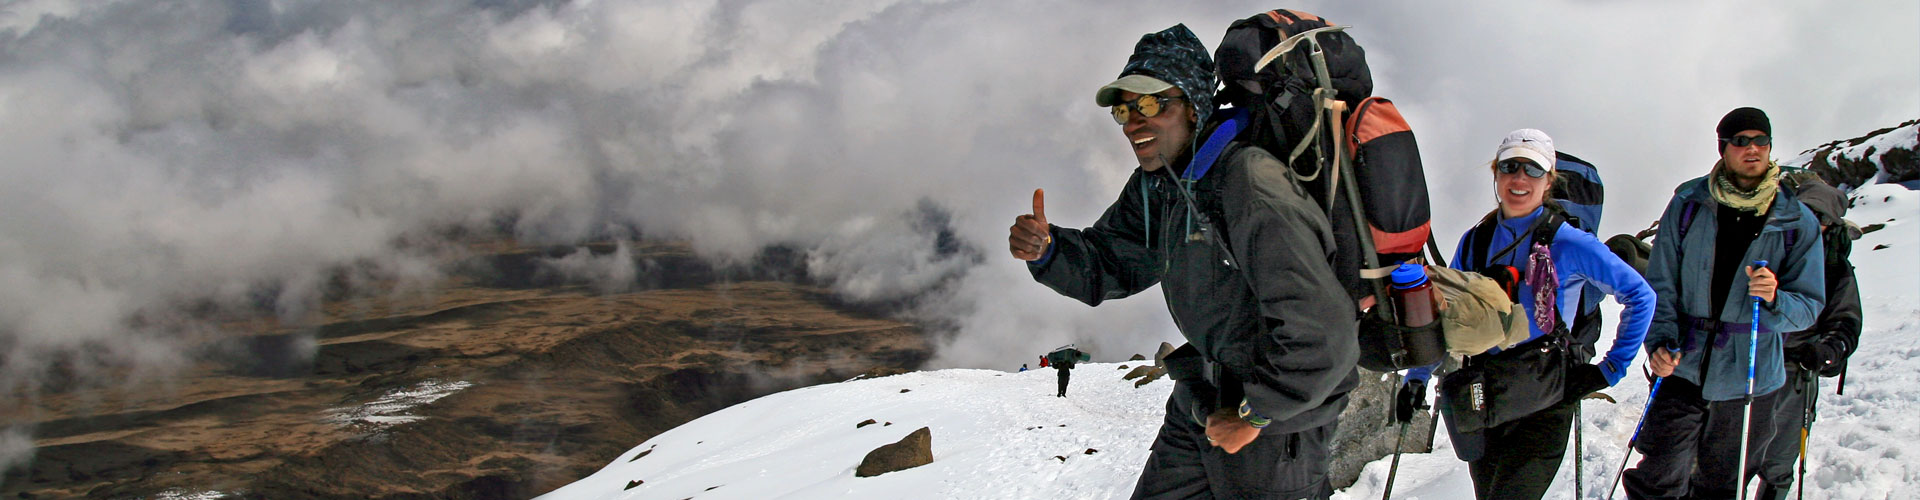 An optimistic guide leading a group of trekkers